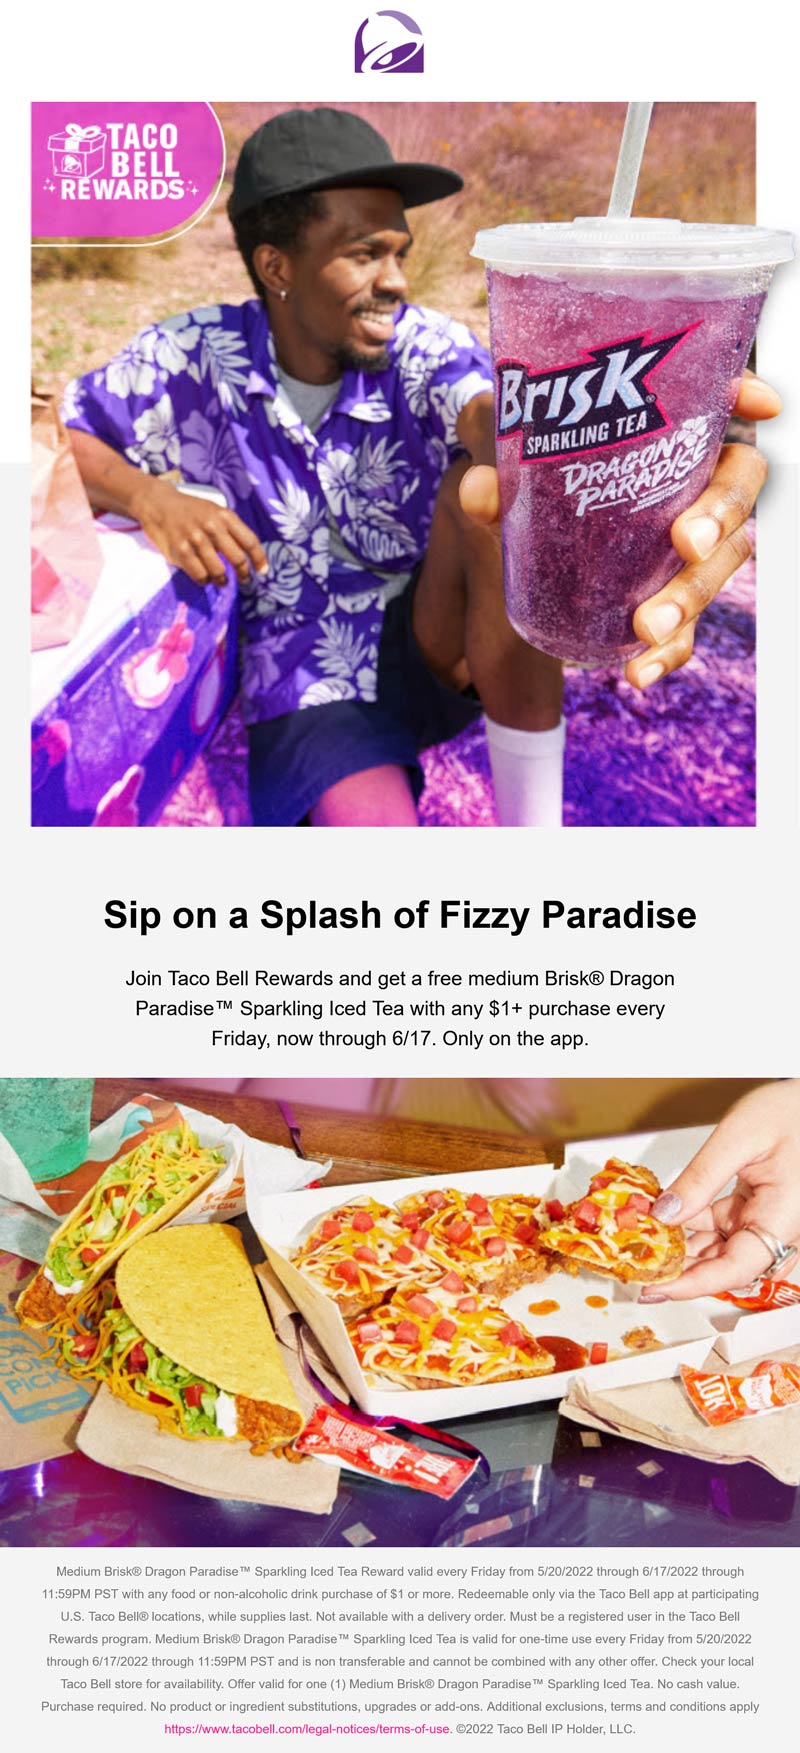 Taco Bell restaurants Coupon  Free sparkling iced tea with $1 spent Fridays via mobile at Taco Bell #tacobell 